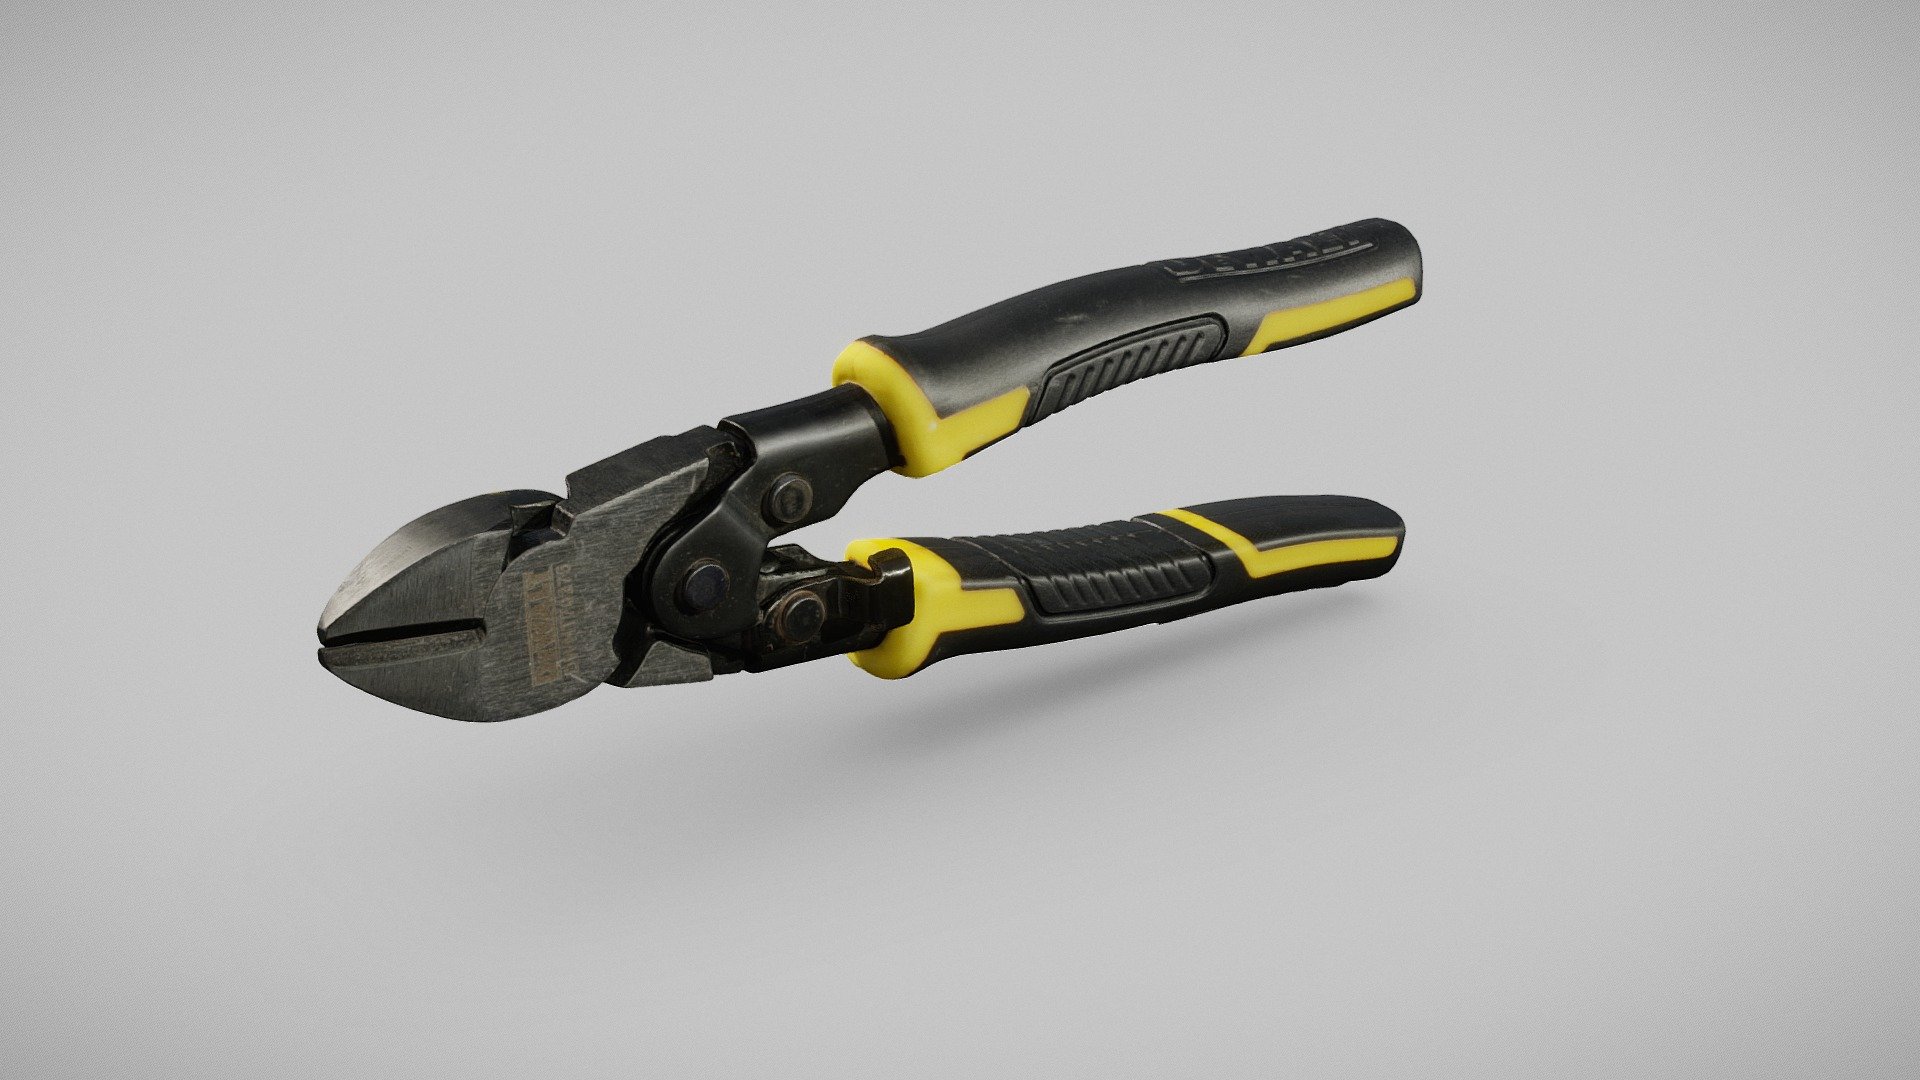 ** DeWALT Diagonal Pliers **

Compound Action Diagonal DeWALT Pliers. 70% More Cutting Power.

18.9 x 6.2 x 2.5 cm (87 micrometers per texel @ 2k)

Scanned using advanced technology developed by inciprocal Inc. that enables highly photo-realistic reproduction of real-world products in virtual environments. Our hardware and software technology combines advanced photometry, structured light, photogrammtery and light fields to capture and generate accurate material representations from tens of thousands of images targeting real-time and offline path-traced PBR compatible renderers.

Zip file includes low-poly OBJ mesh (in meters) with a set of 2k PBR textures compressed with lossless JPEG (no chroma sub-sampling) 3d model